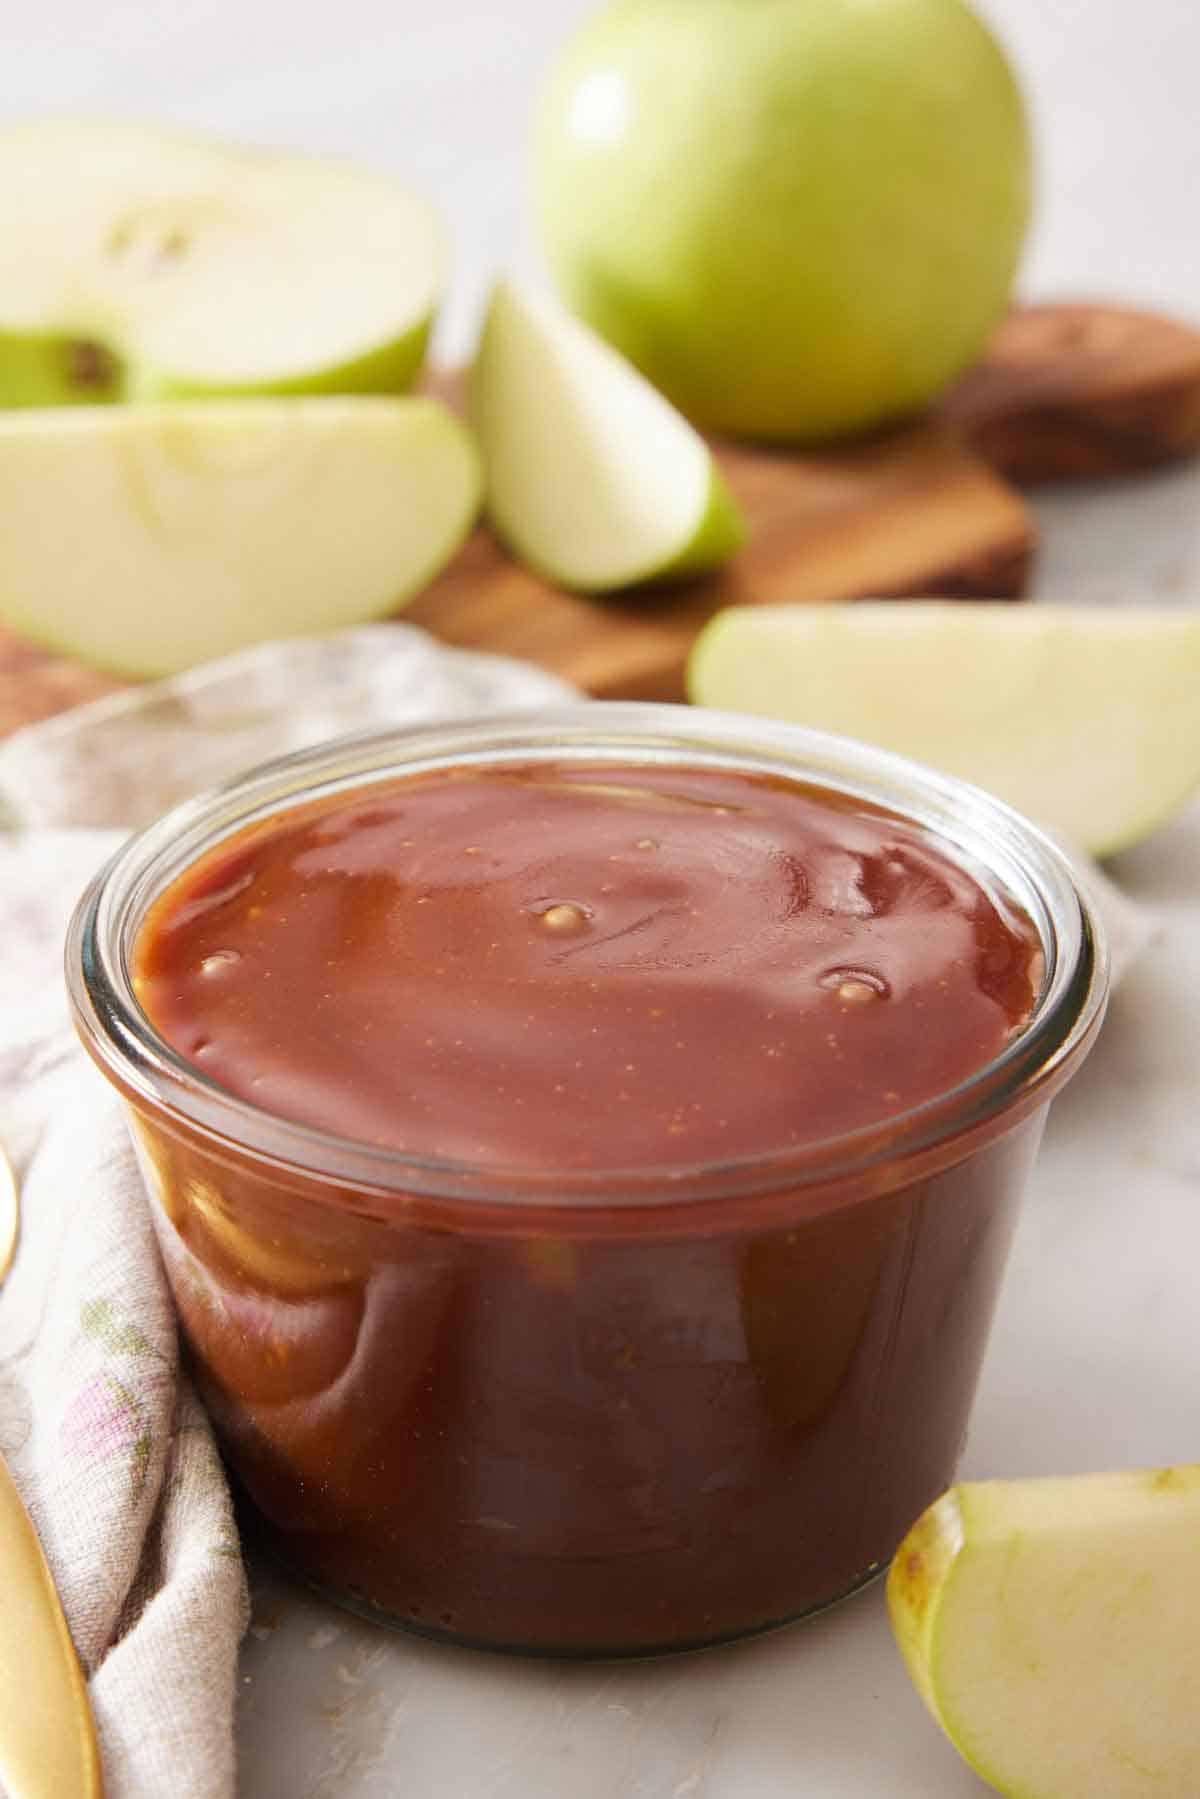 A jar of caramel sauce with some chopped apples in the background.